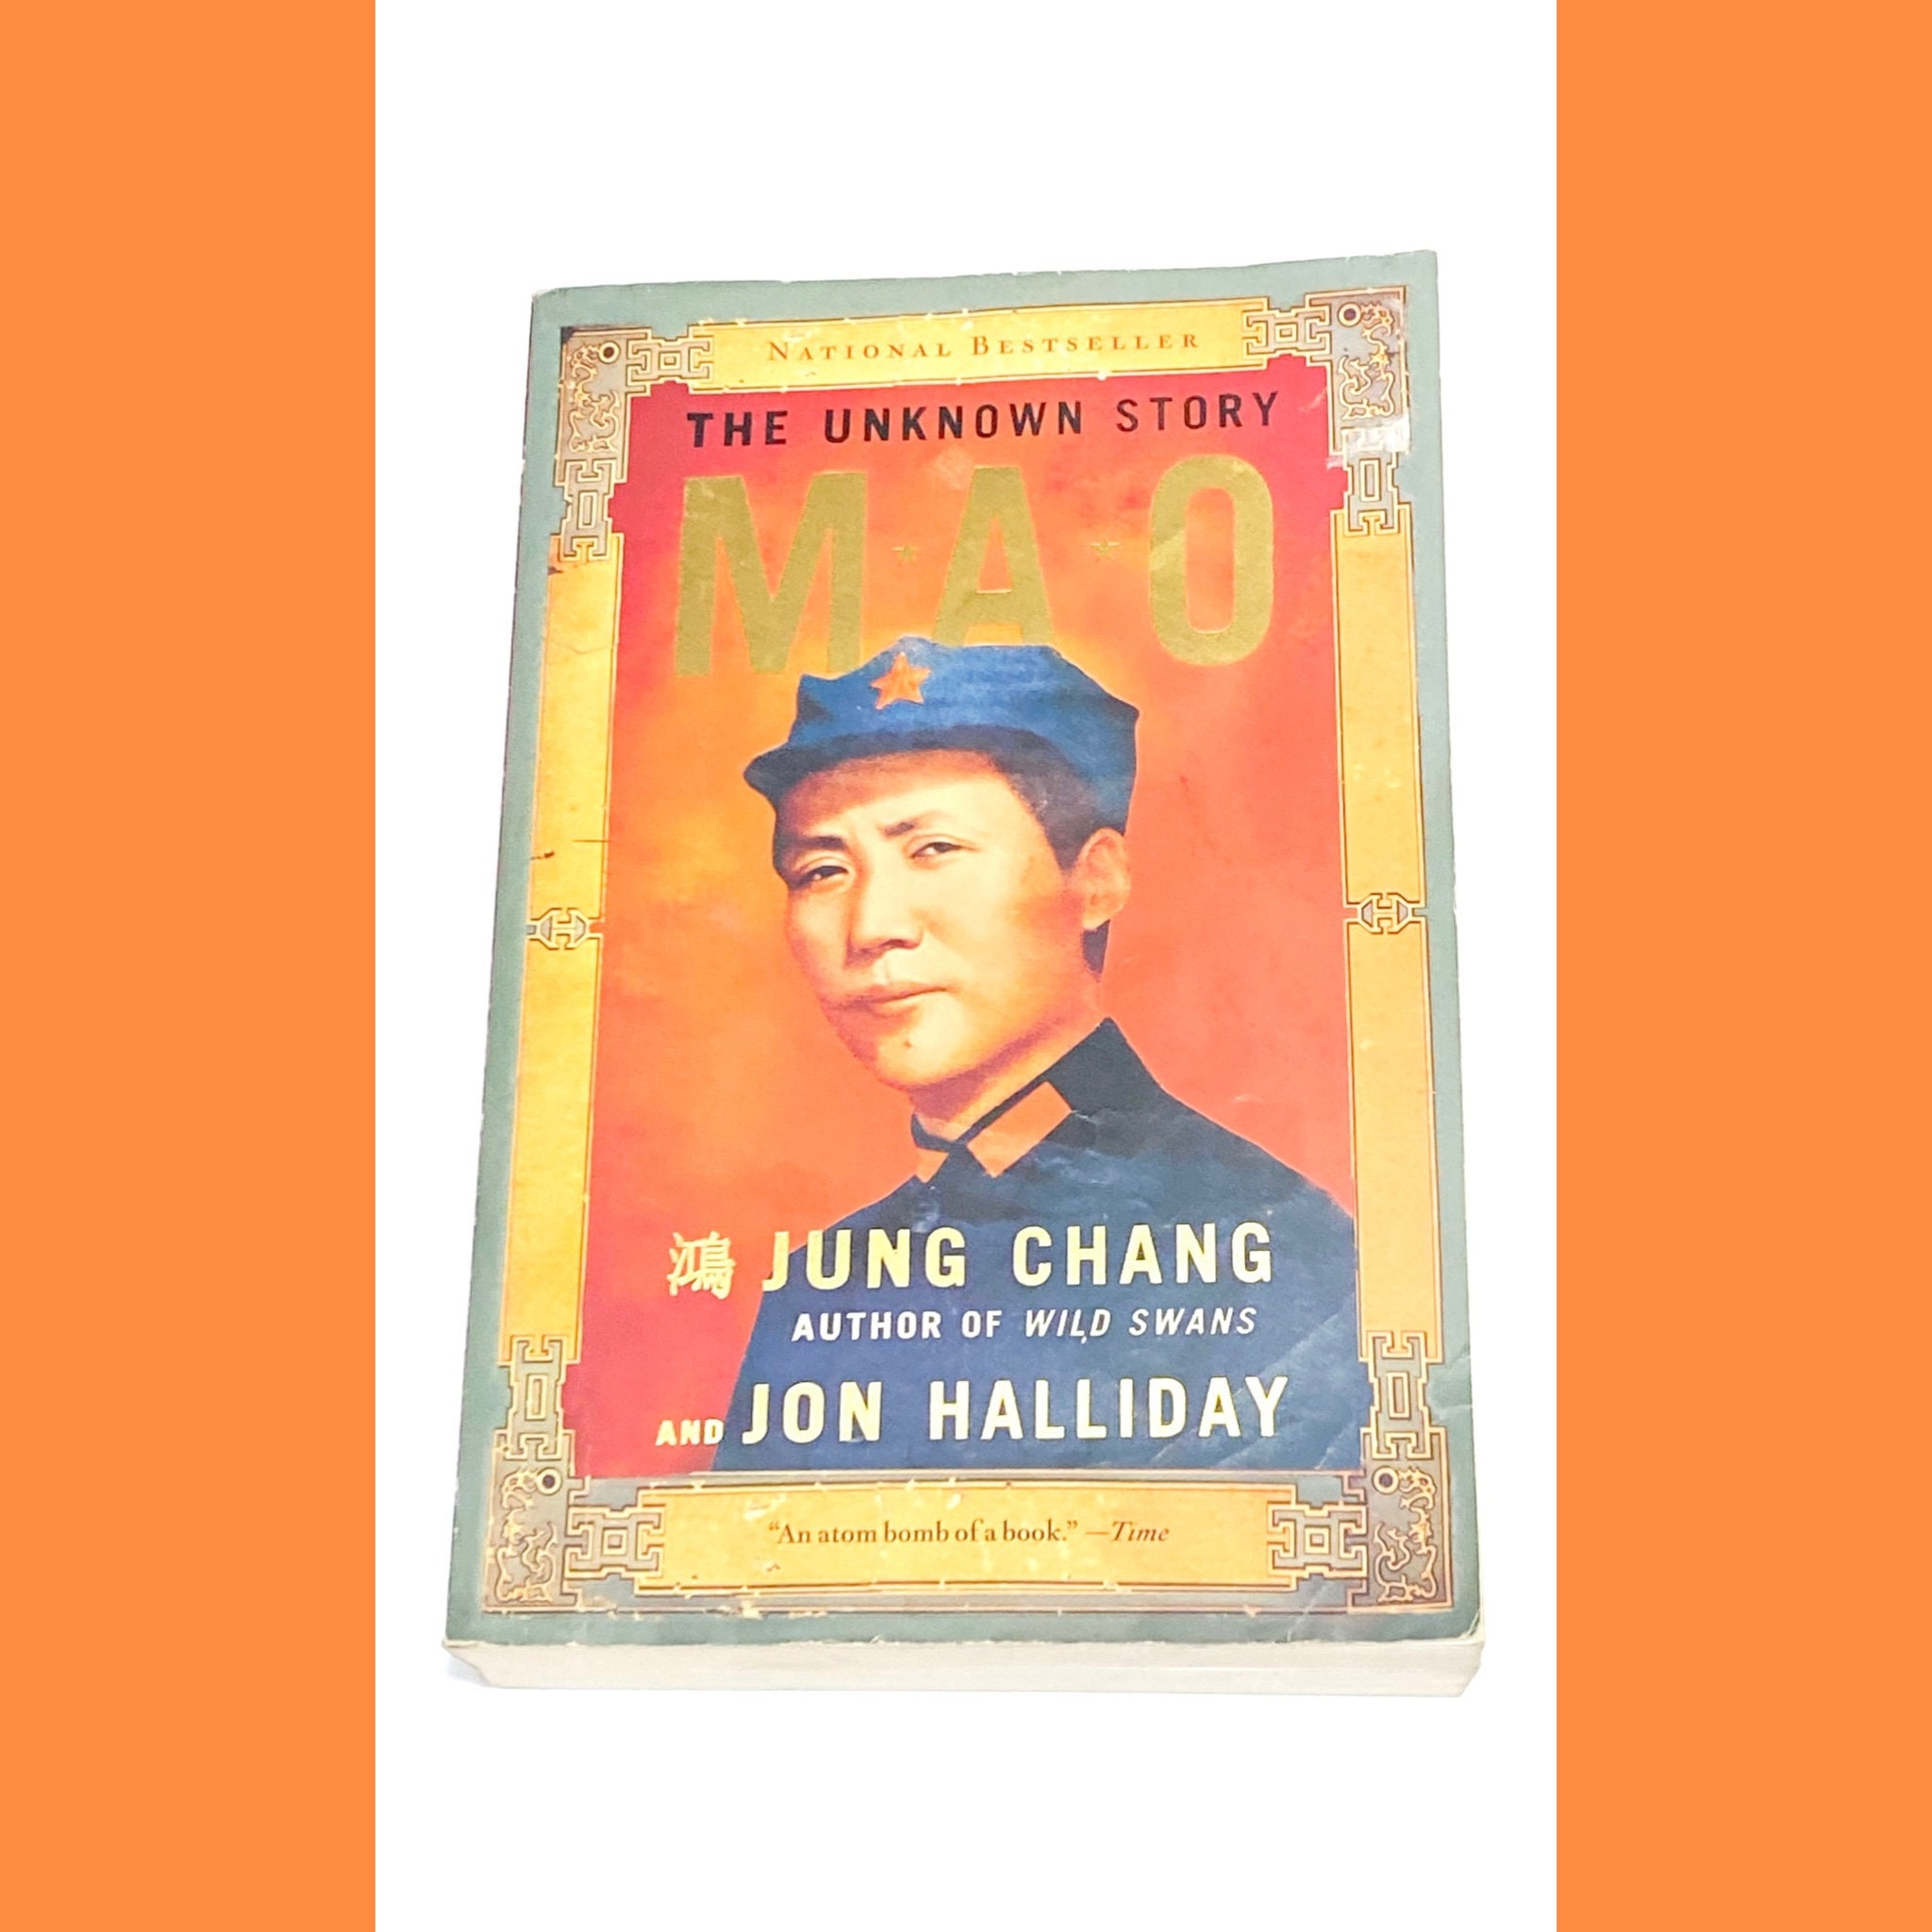 Chang　Story　Mao　Unknown　Etsy　the　Biography　Vintage　Jung　Ireland